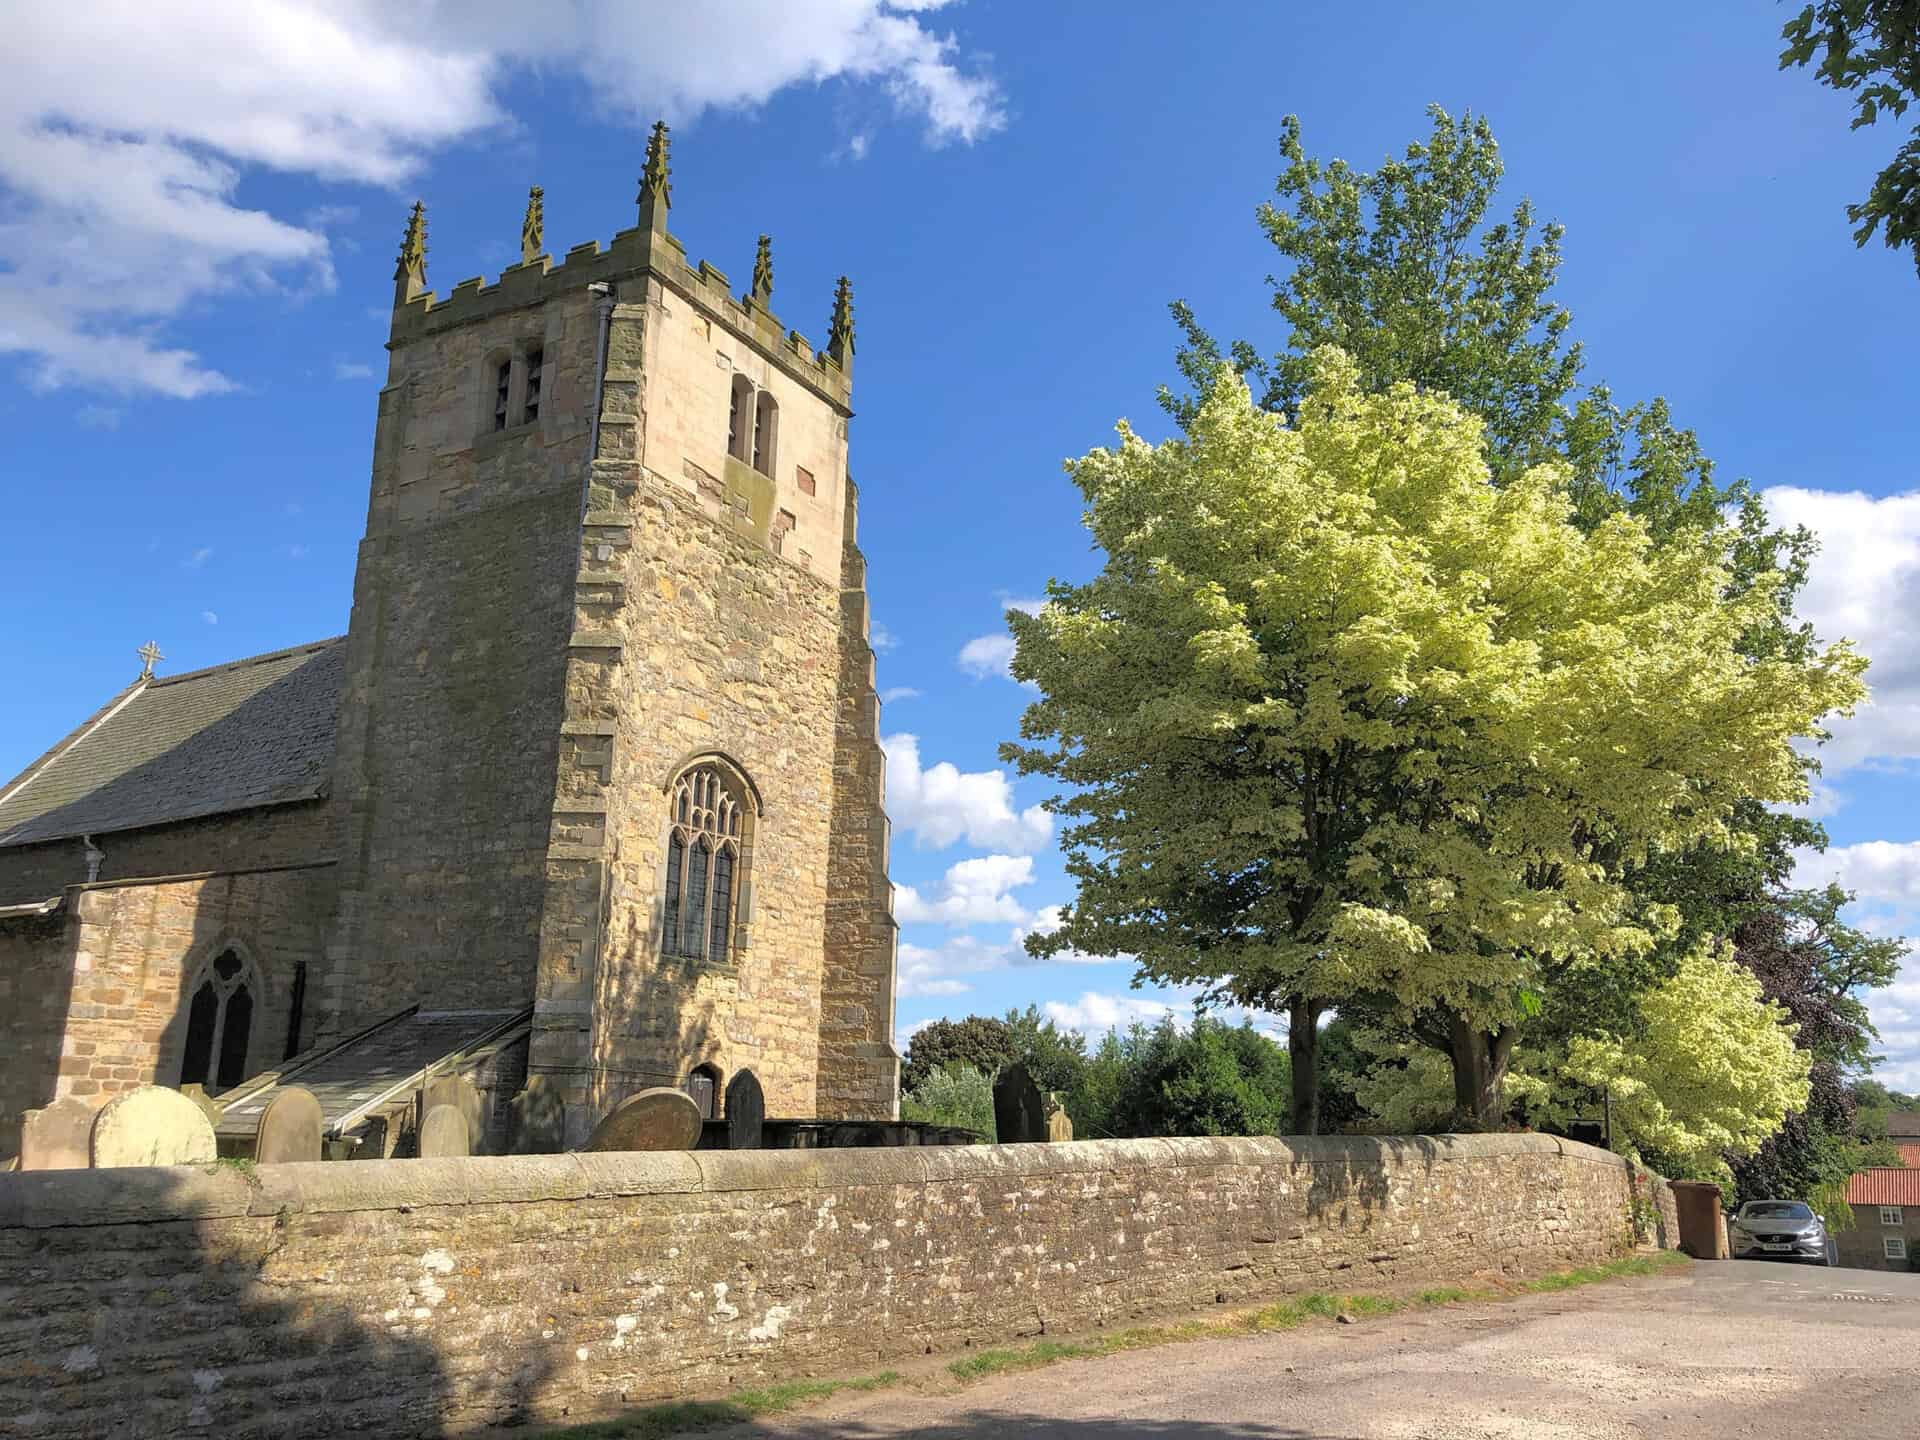 The Church of All Saints in Terrington is a Grade I listed building with a rich history.